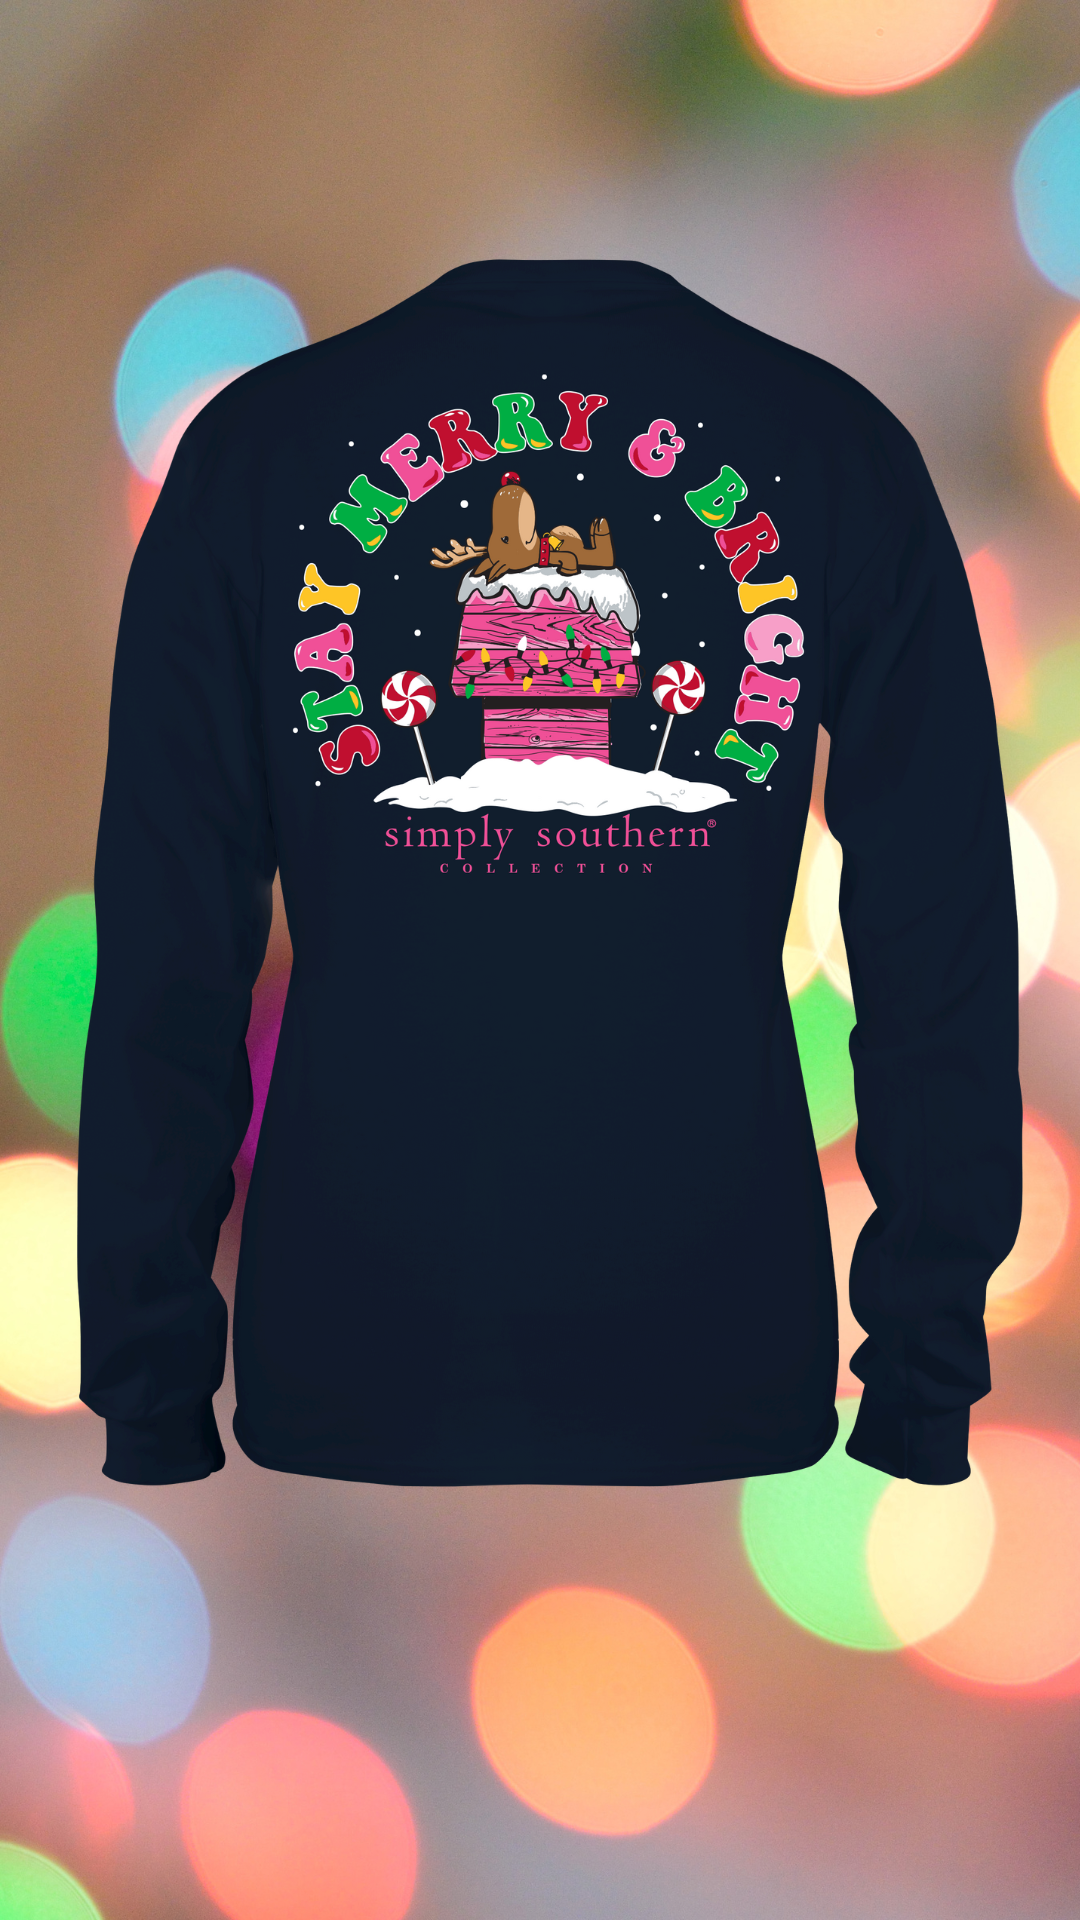 Youth 'Stay Merry & Bright' Long Sleeve Tee by Simply Southern